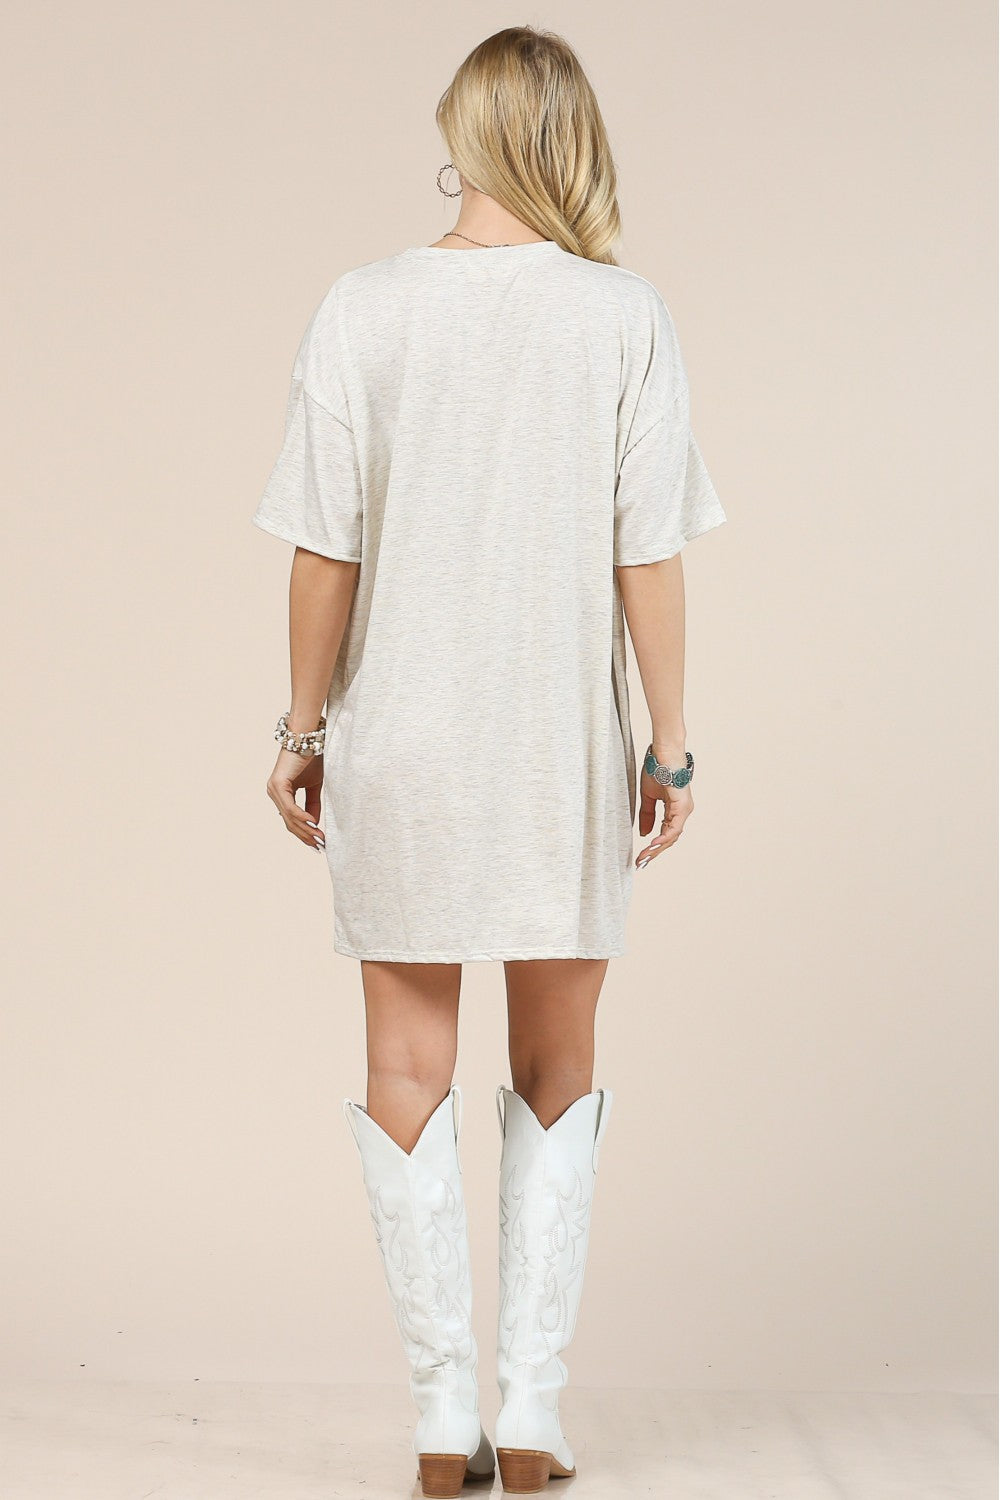 "My First Rodeo" Graphic  Shirt Dress